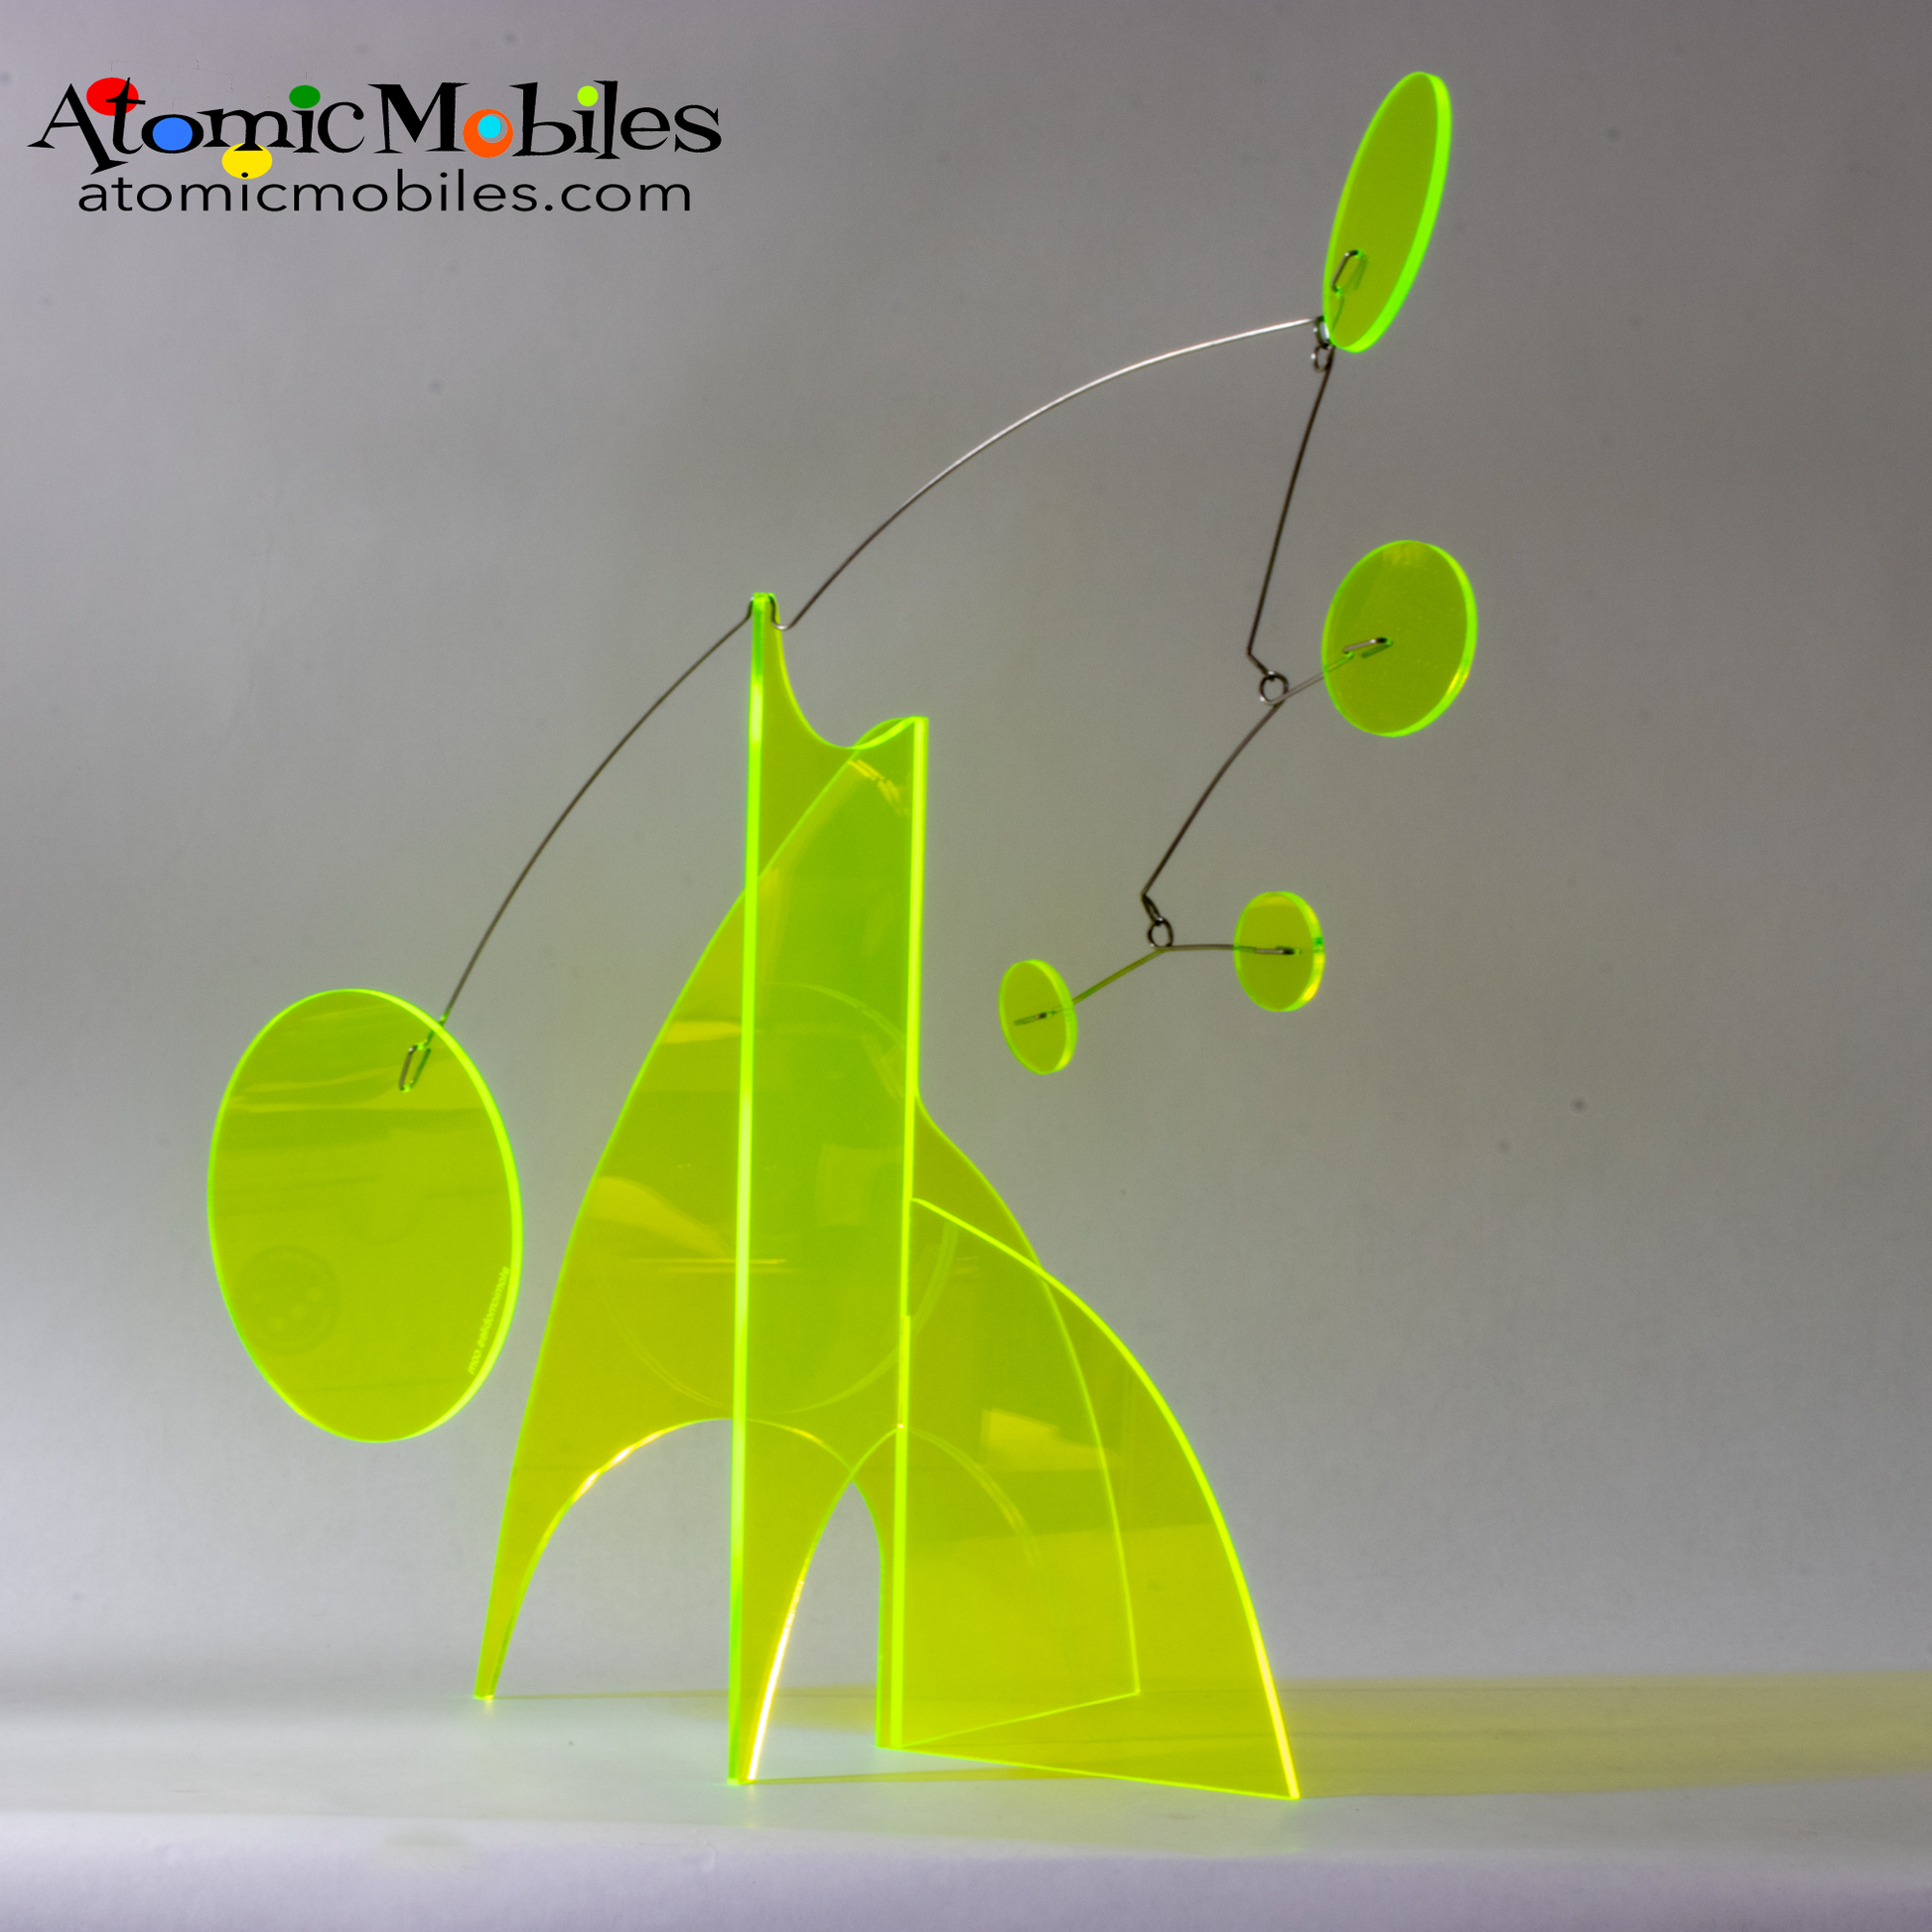 Bright neon fluorescent acrylic plexiglass Moderne Art Stabile in Lime Green- tabletop mobiles hand made in Los Angeles, California by AtomicMobiles.com